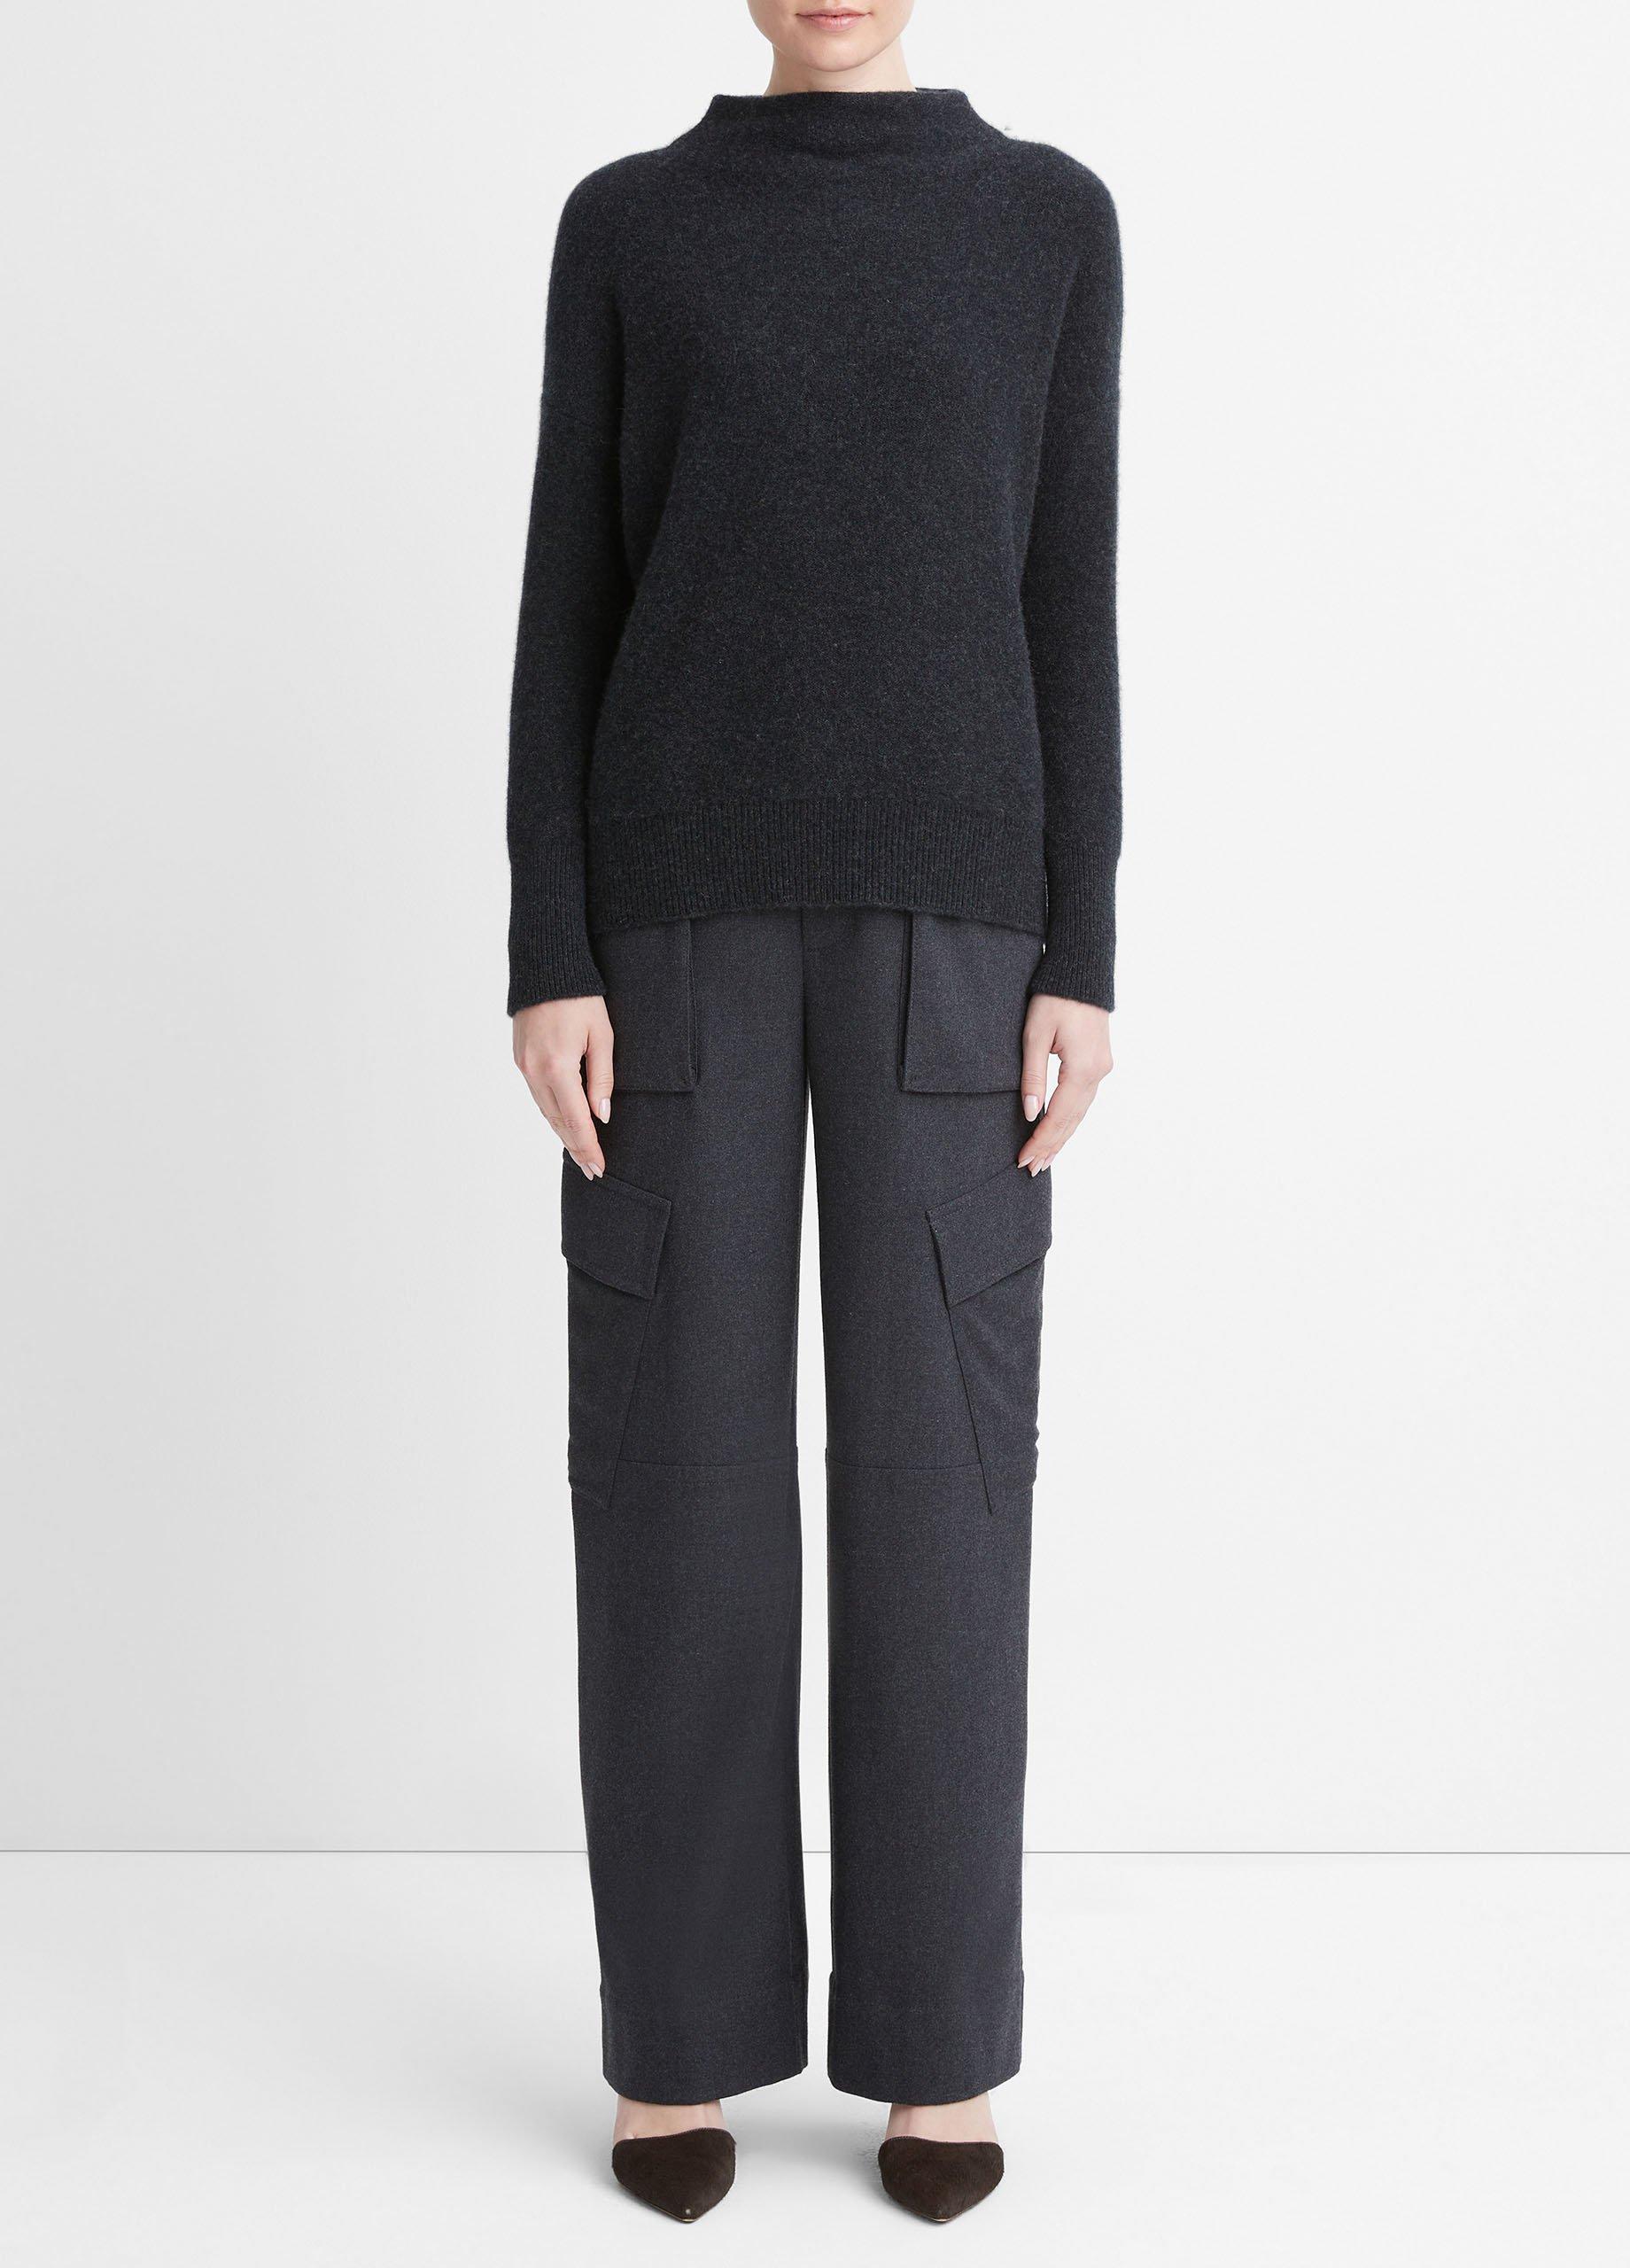 Vince Plush Cashmere Funnel Neck Sweater, Grey, Size S in Black | Lyst  Canada